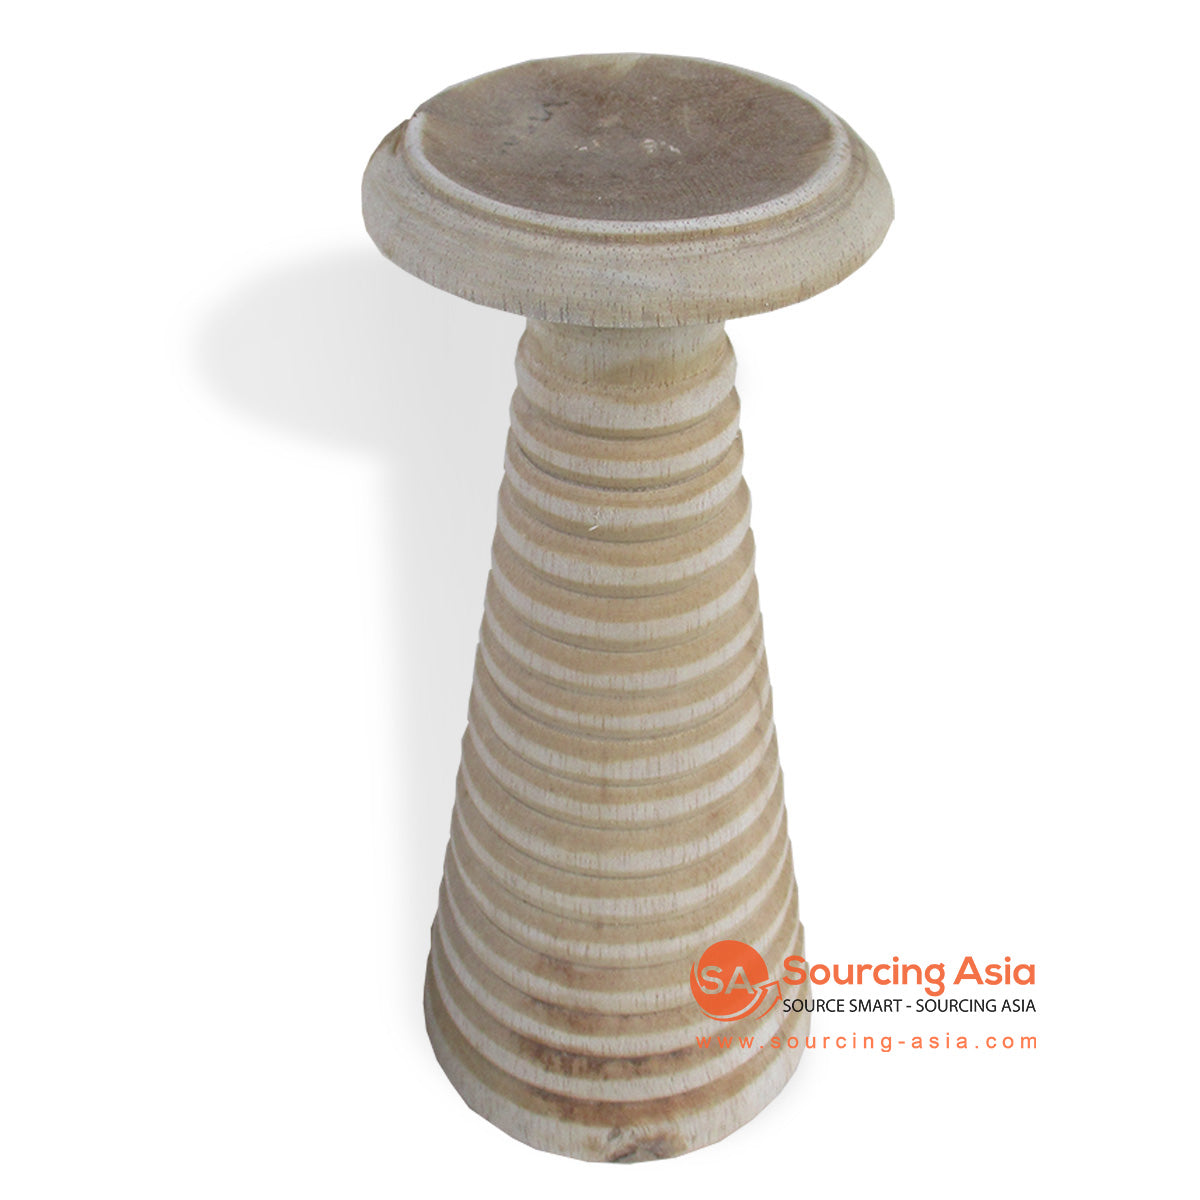 CHWD075-20 WOODEN CANDLE HOLDER